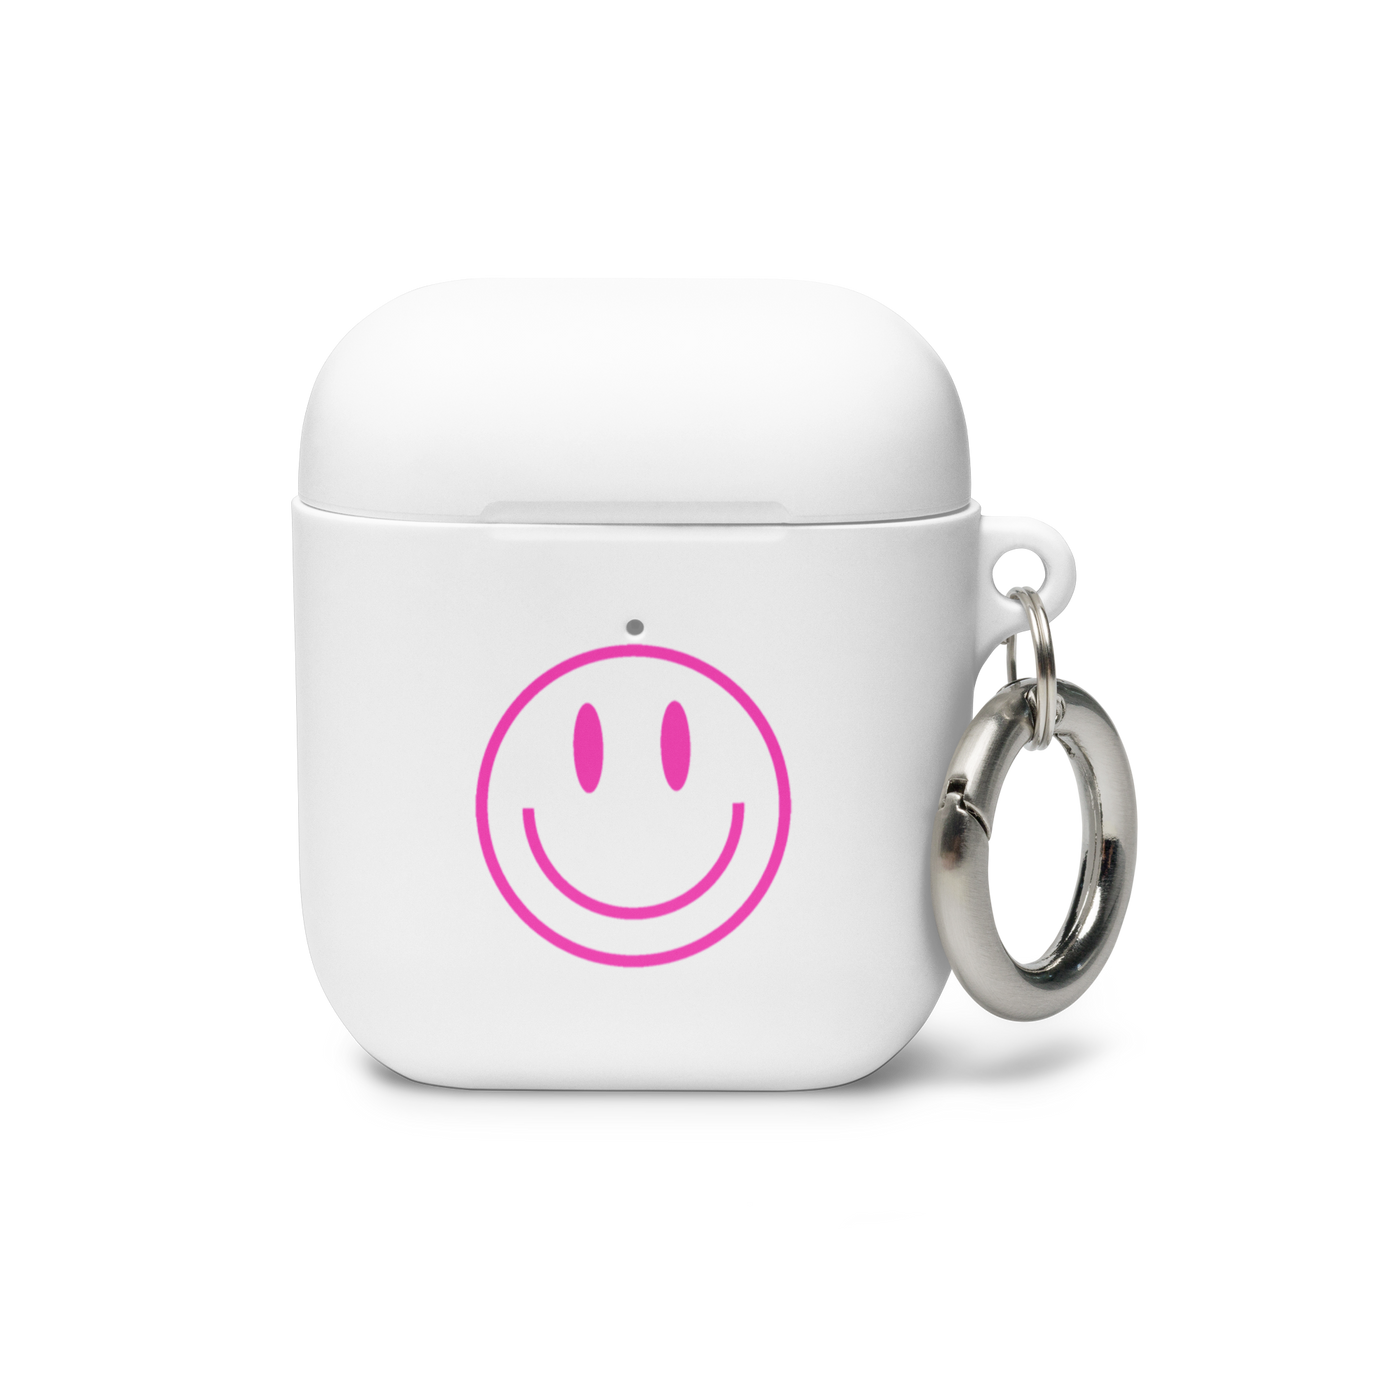 Smiley Print AirPods Case